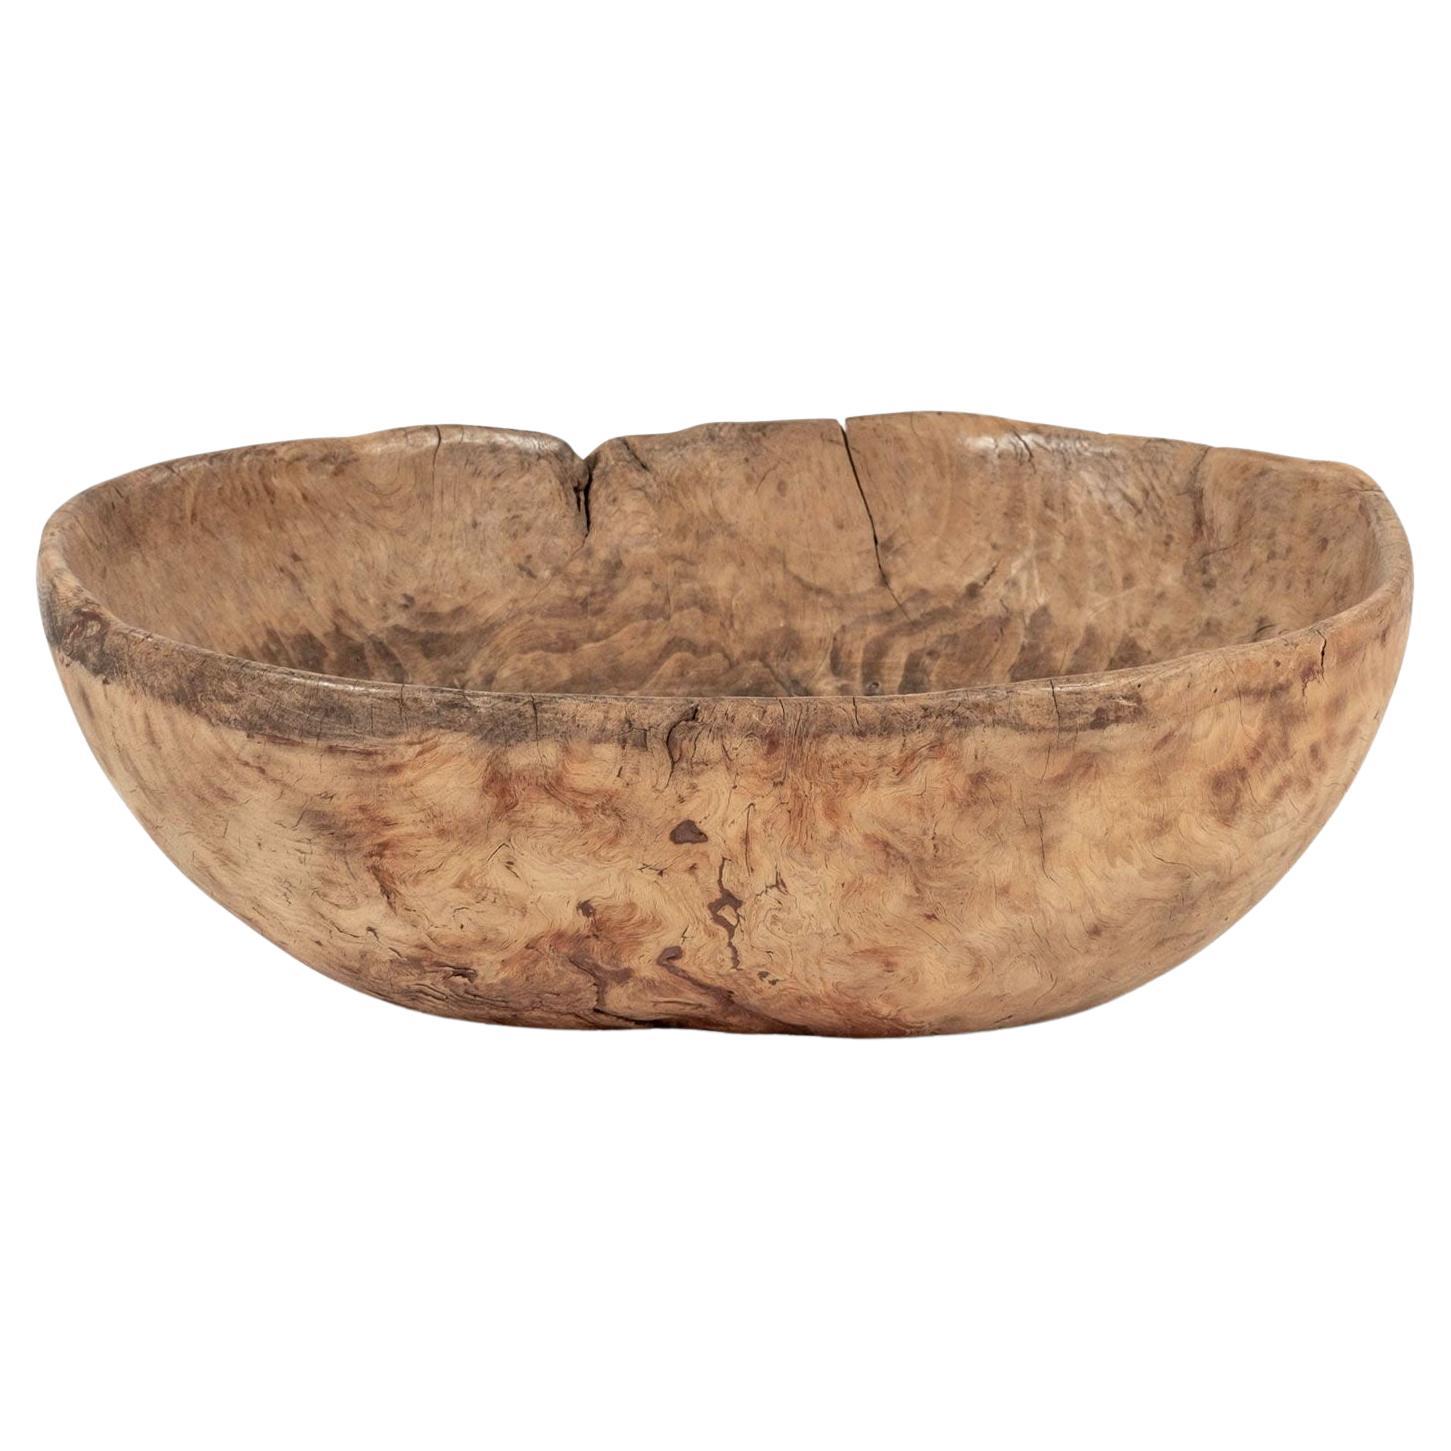 Large Primitive Oval-Shaped Dug Out Bowl from Sweden